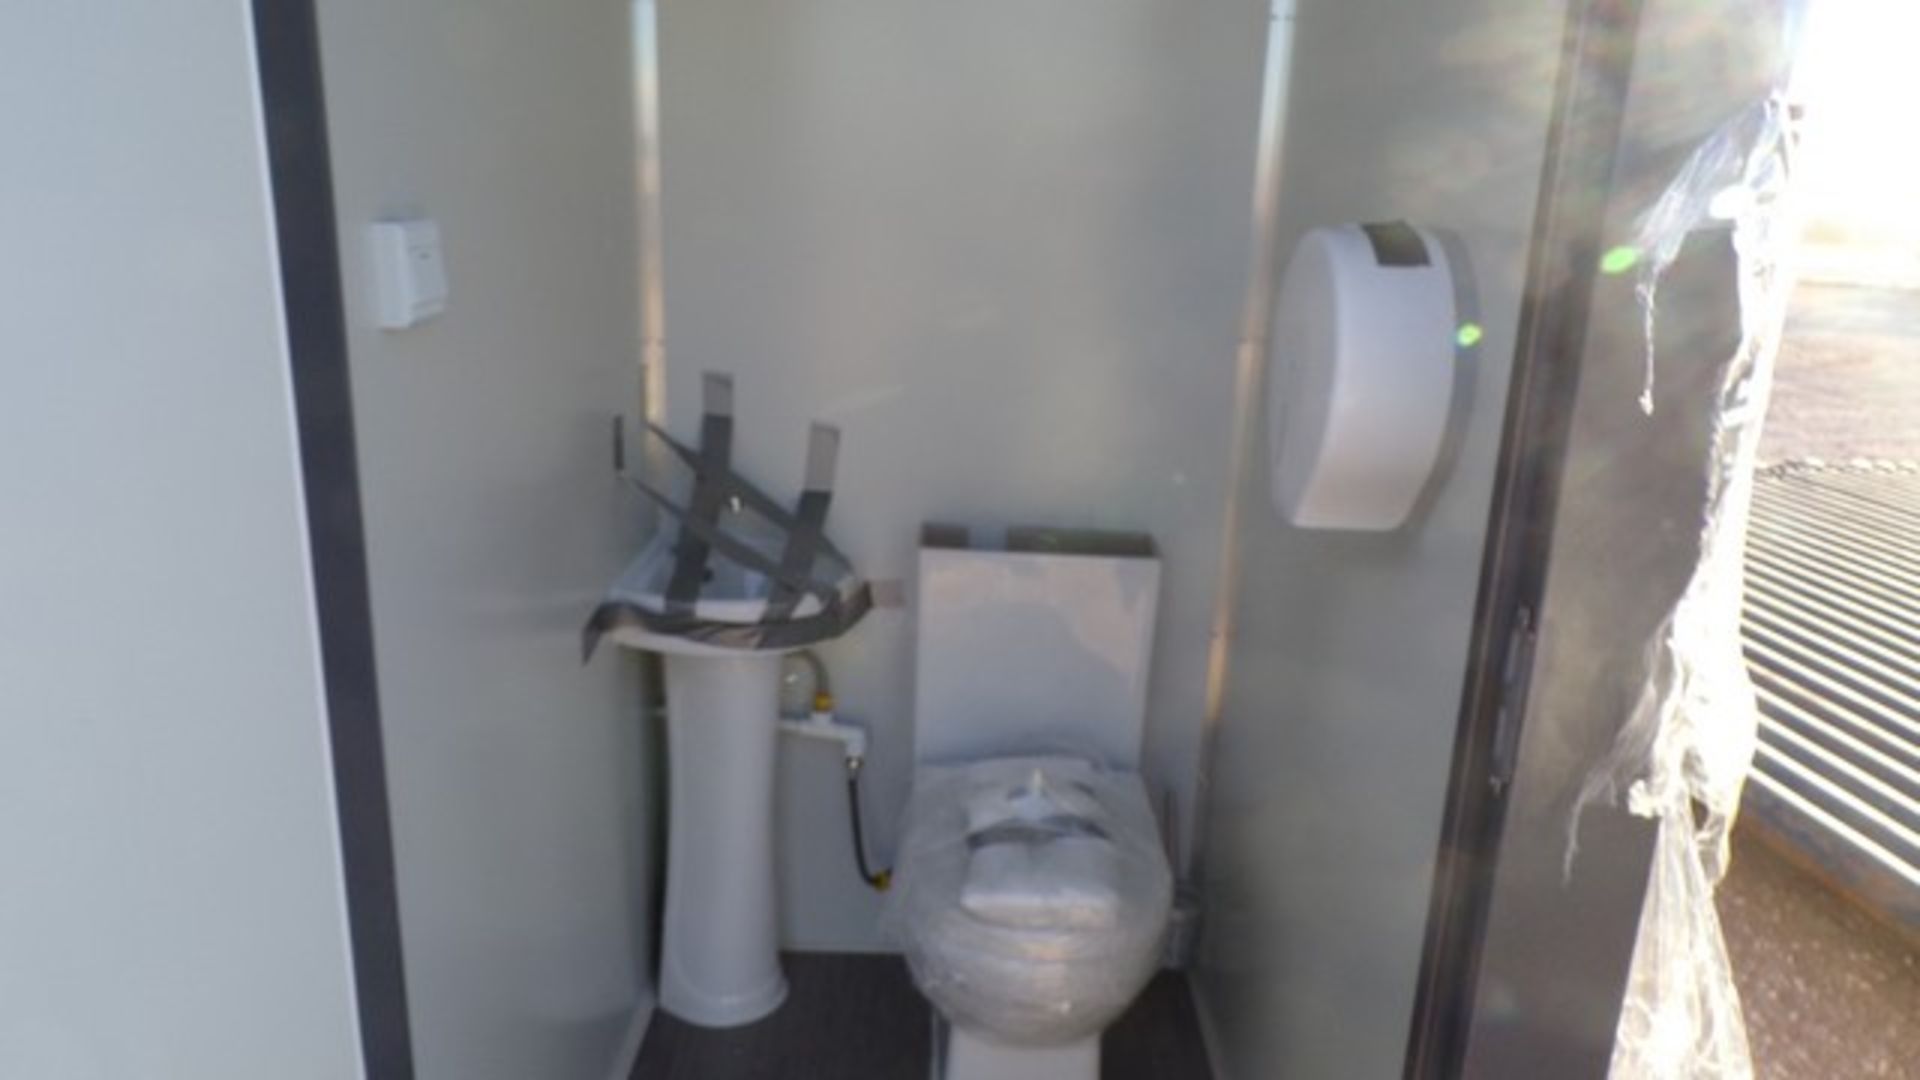 Located in YARD 1 - Midland, TX NEW 110V PORTABLE DBL STALL TOILET - Image 3 of 4